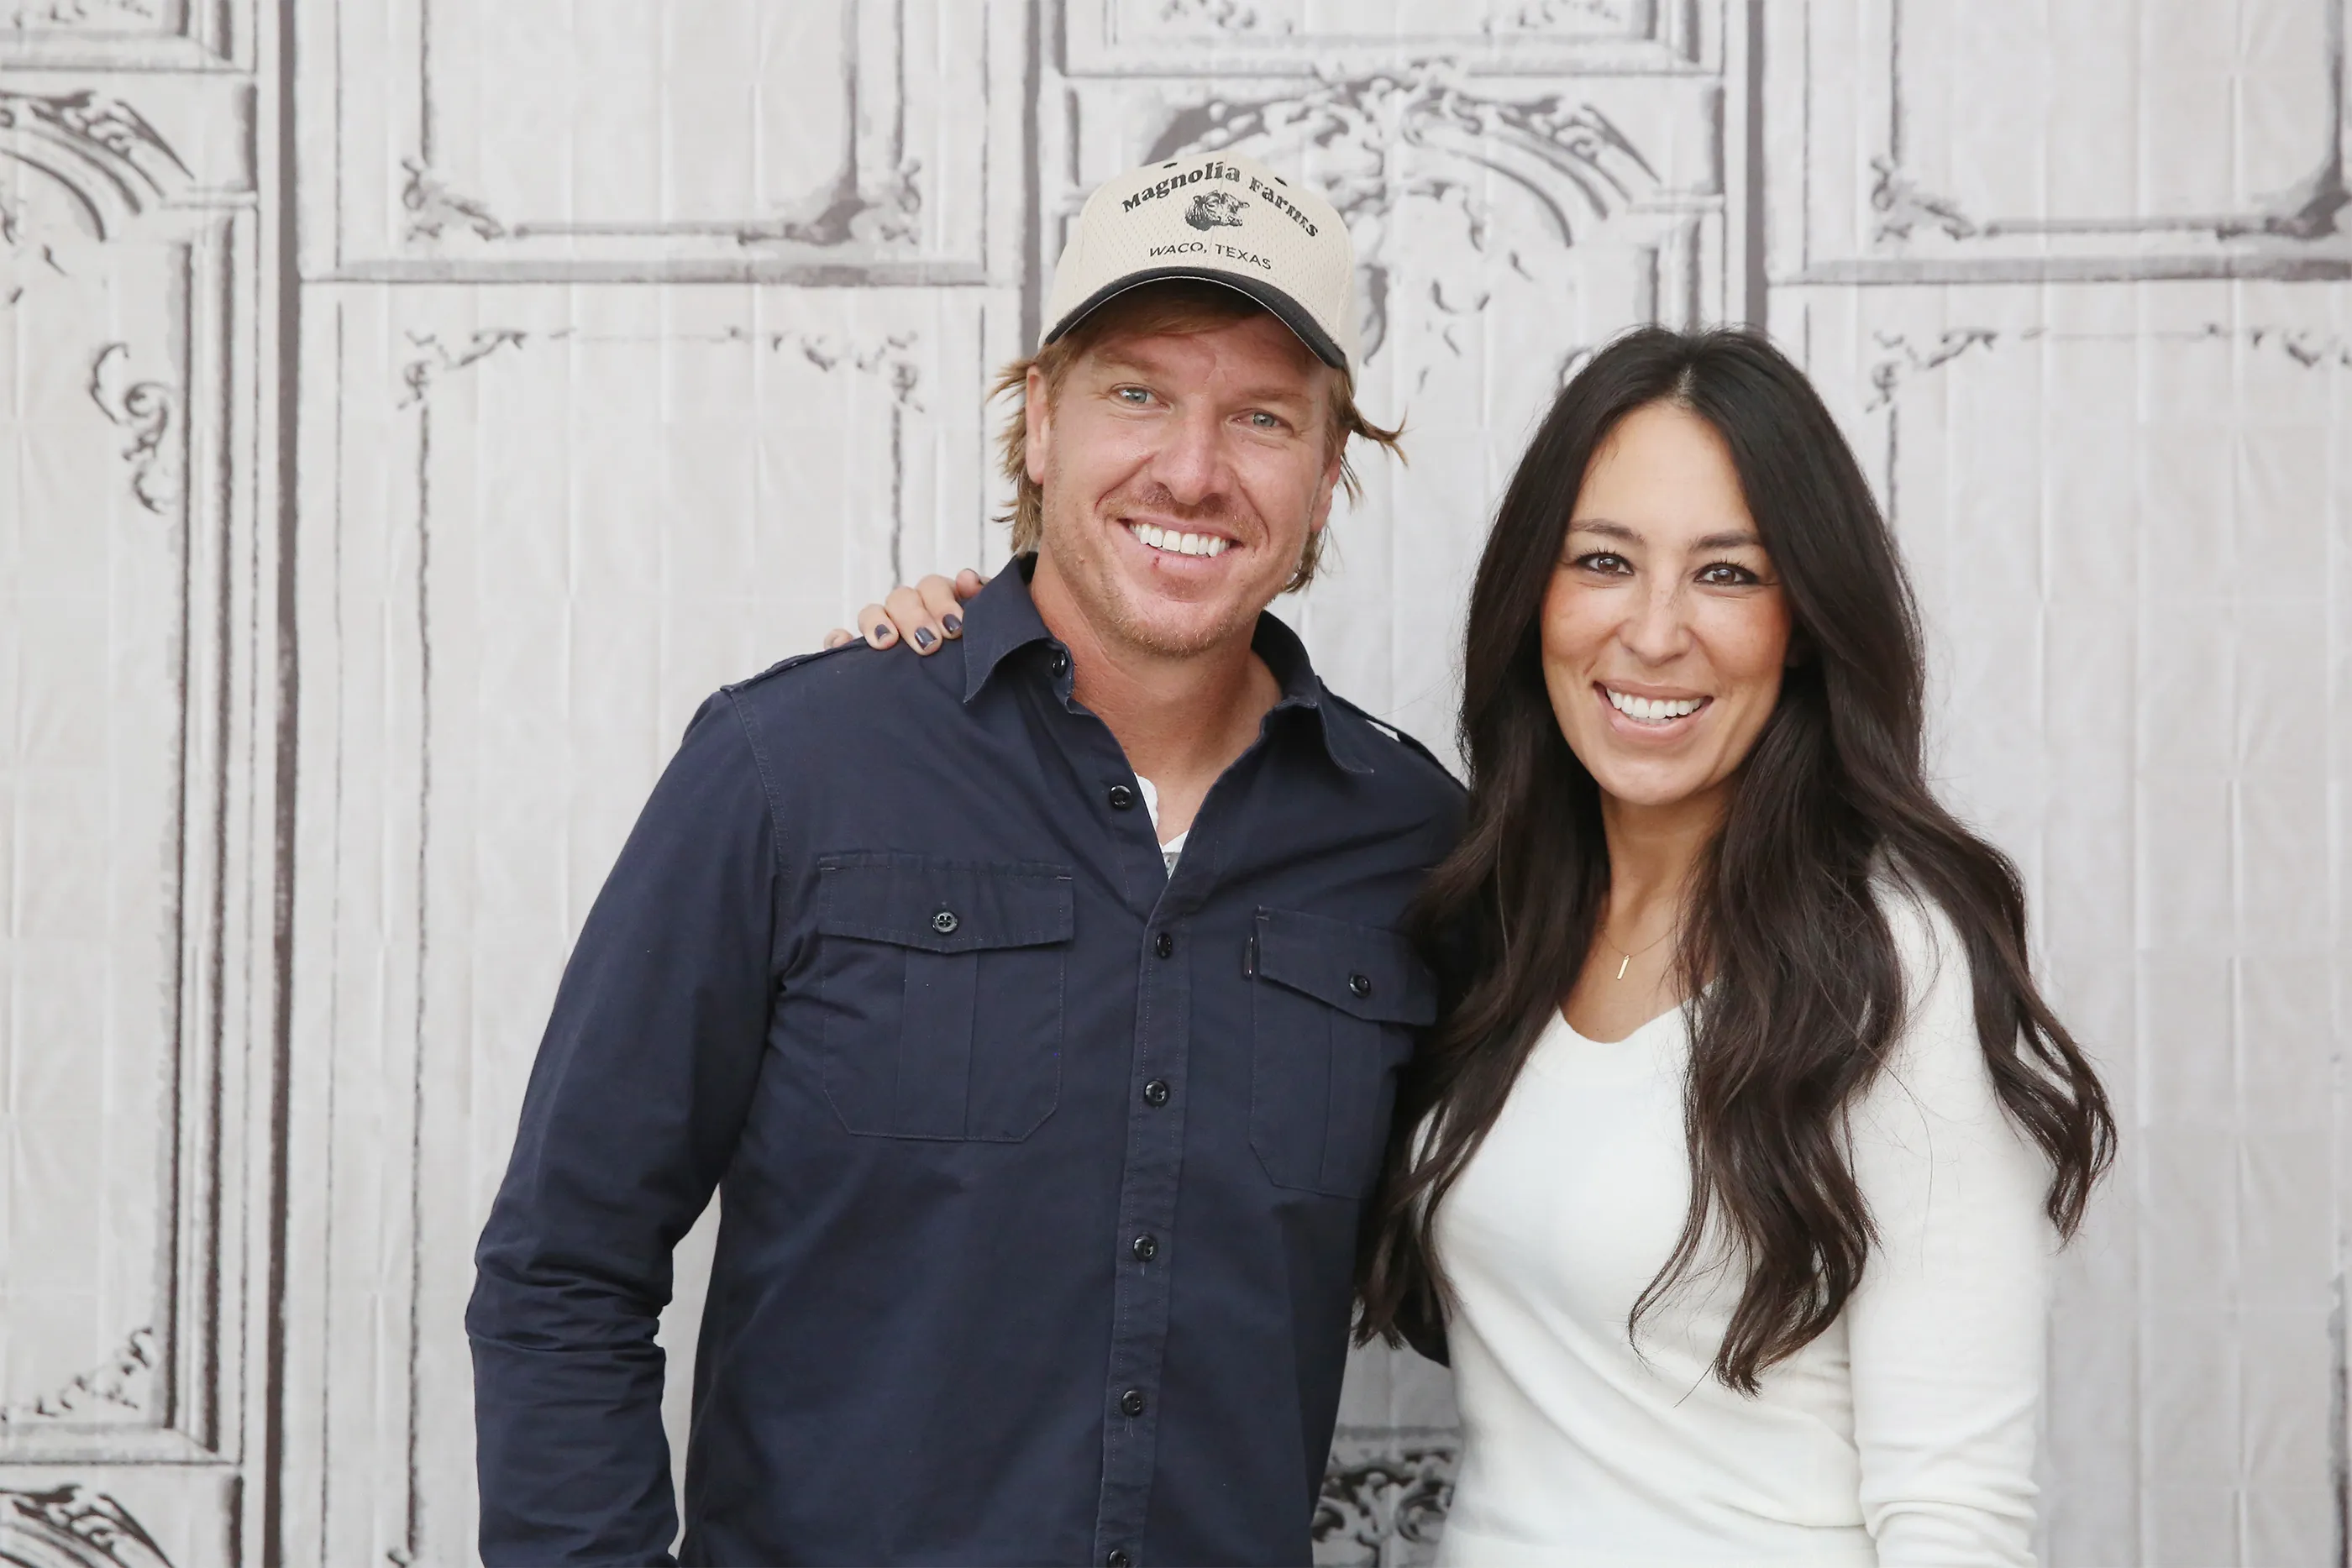 How the 'Fixer Upper' Stars Chip and Joanna Gaines Went From Nobodies in Waco to HGTV’s King and Queen